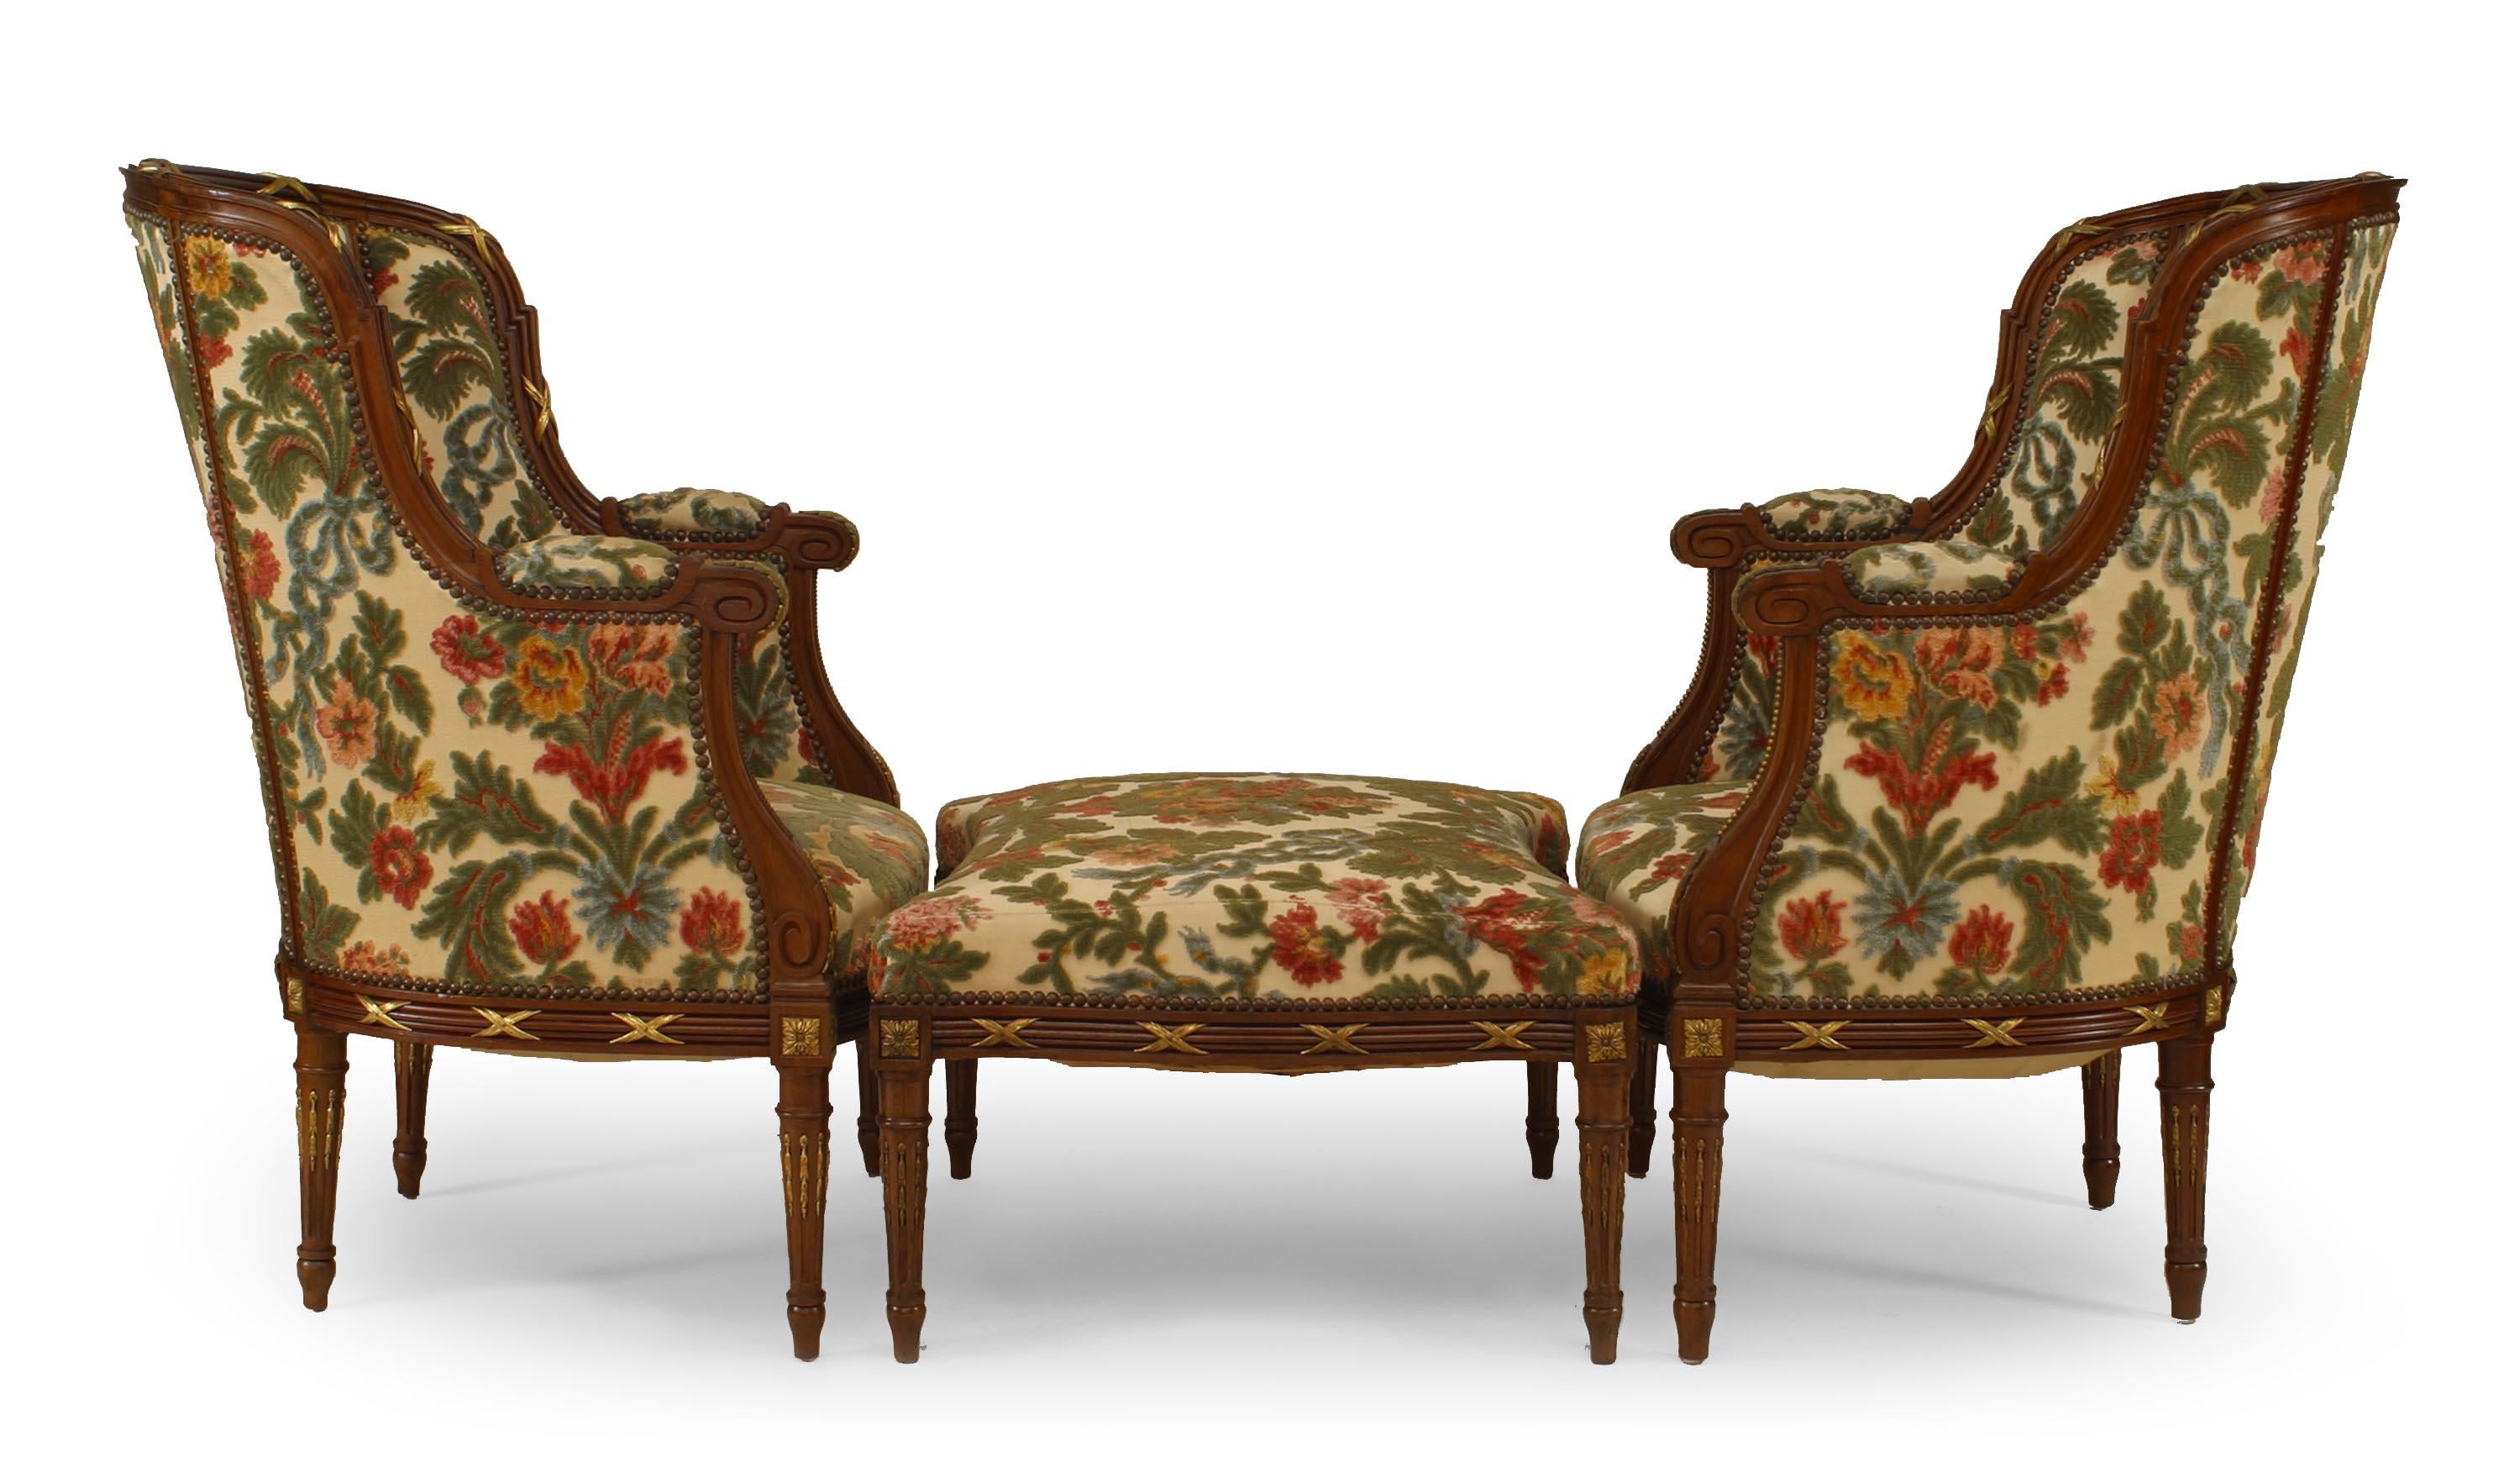 3-Piece Set of French Louis XVI-style (20th Century) bergeres with floral cut velvet tapestry upholstery with matching ottoman (PRICED AS SET).
 